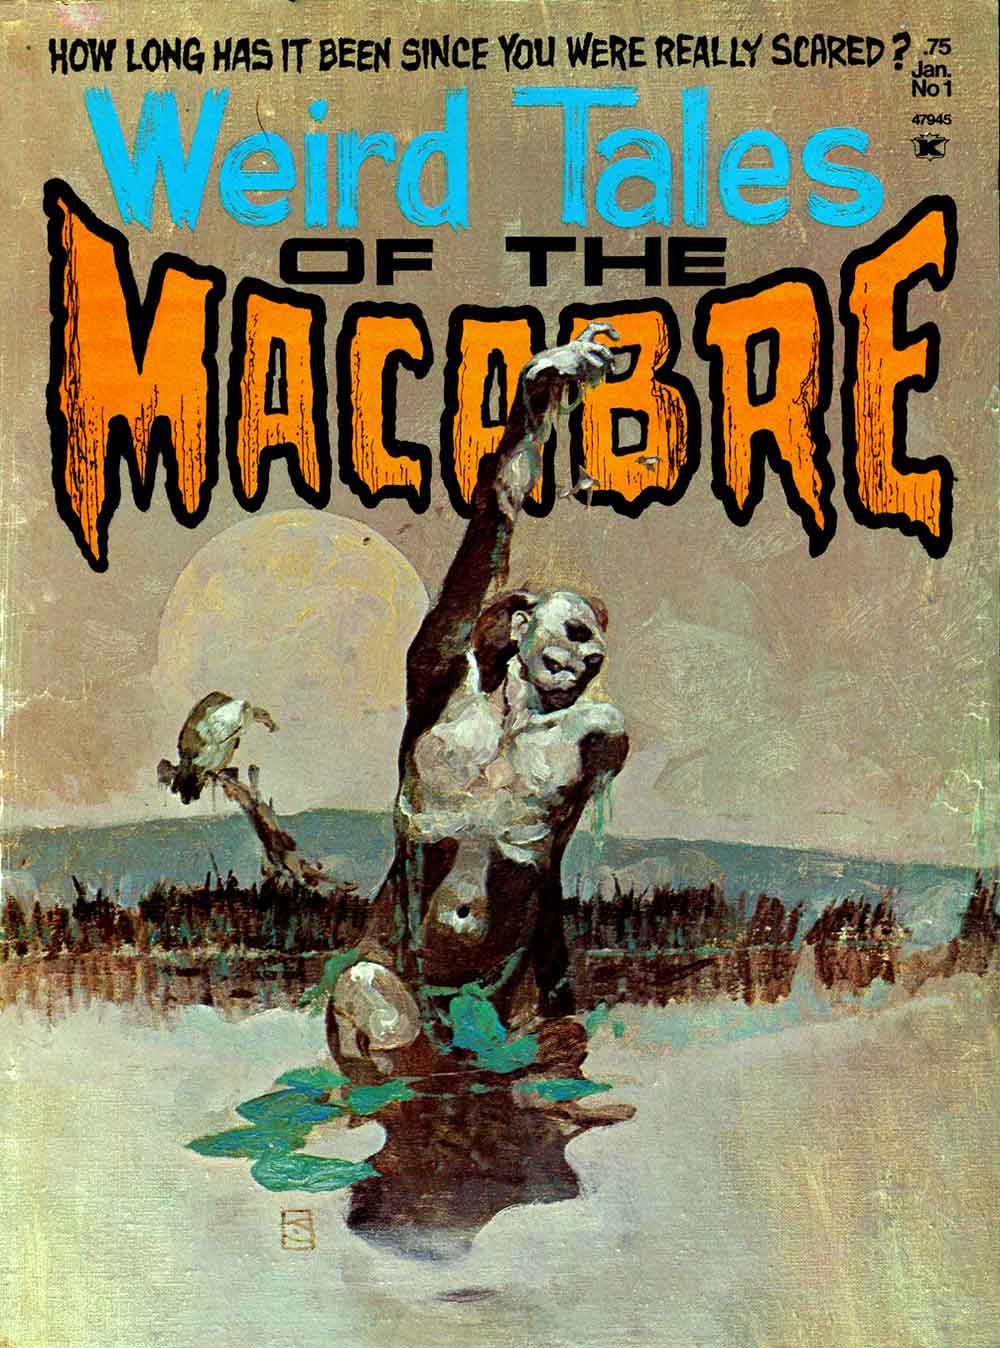 Jeff Jones bronze age 1970s horror cover art painting - Weird Tales of the Macabre #1